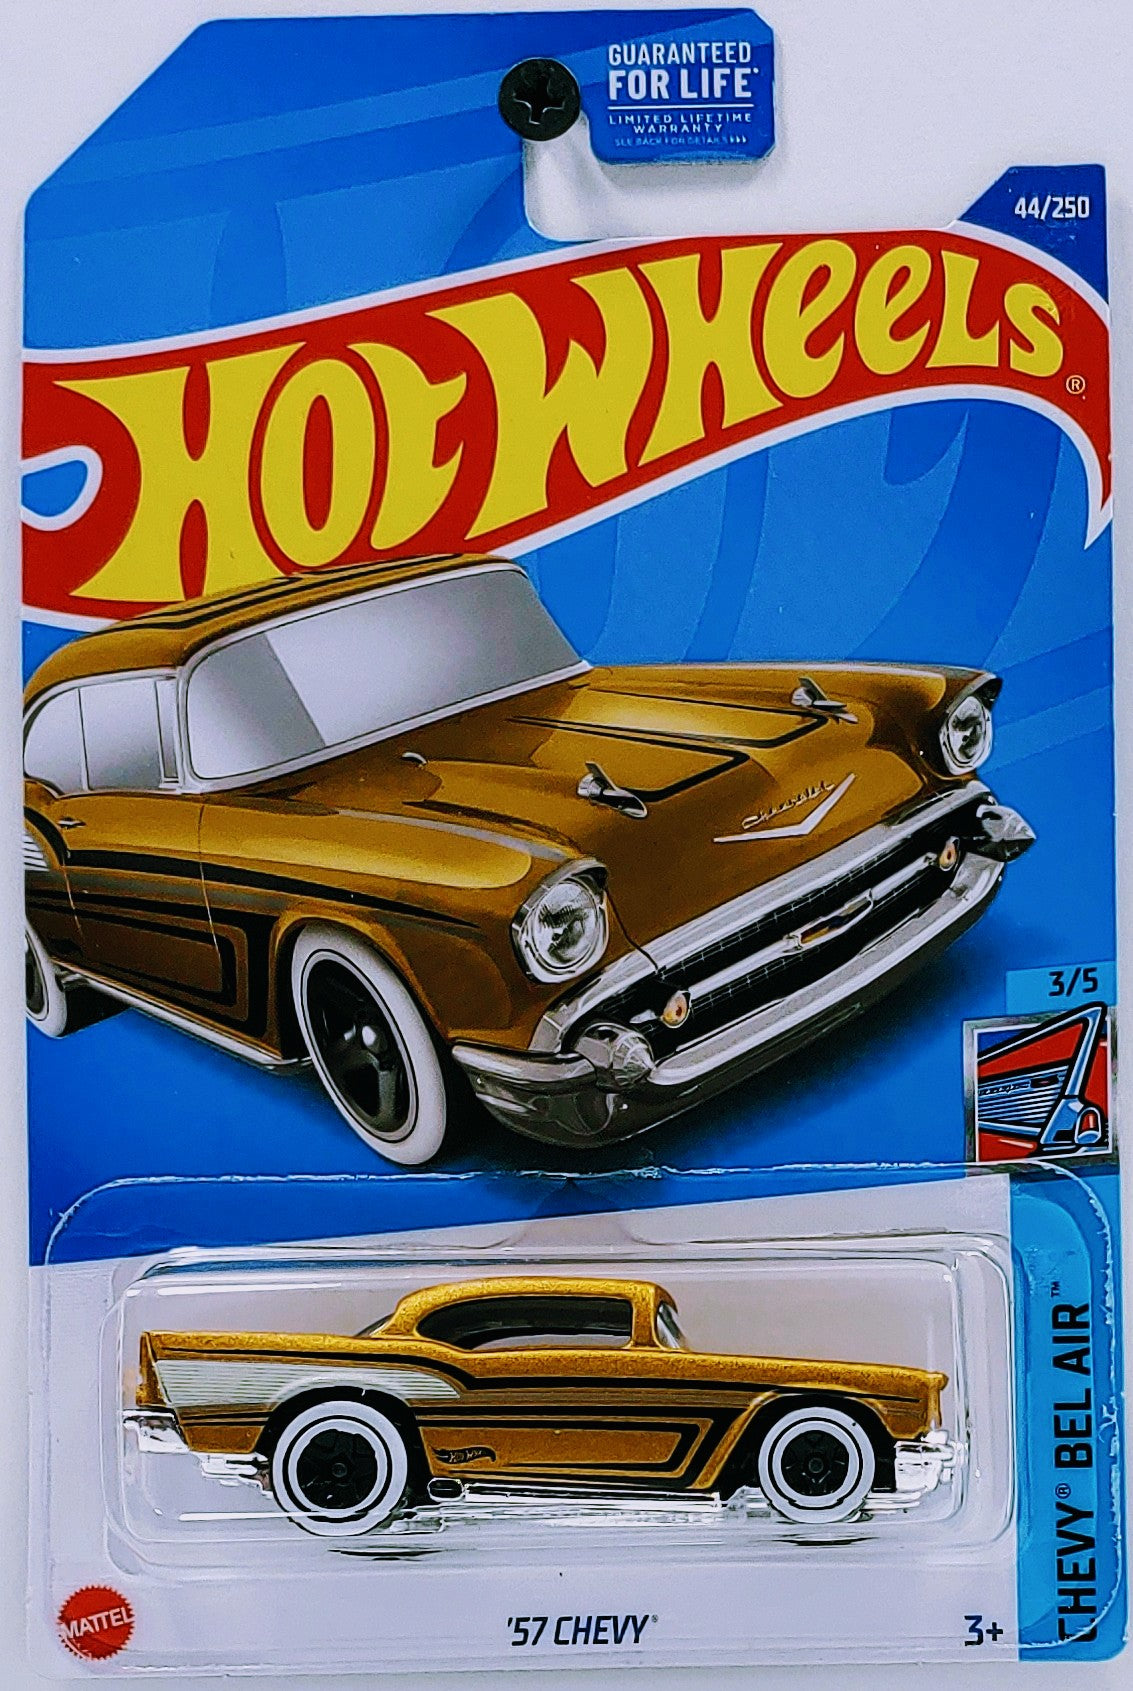 Hot Wheels 2022 - Collector # 044/250 - Chevy Bel Air 3/5 - '57 Chevy - Gold